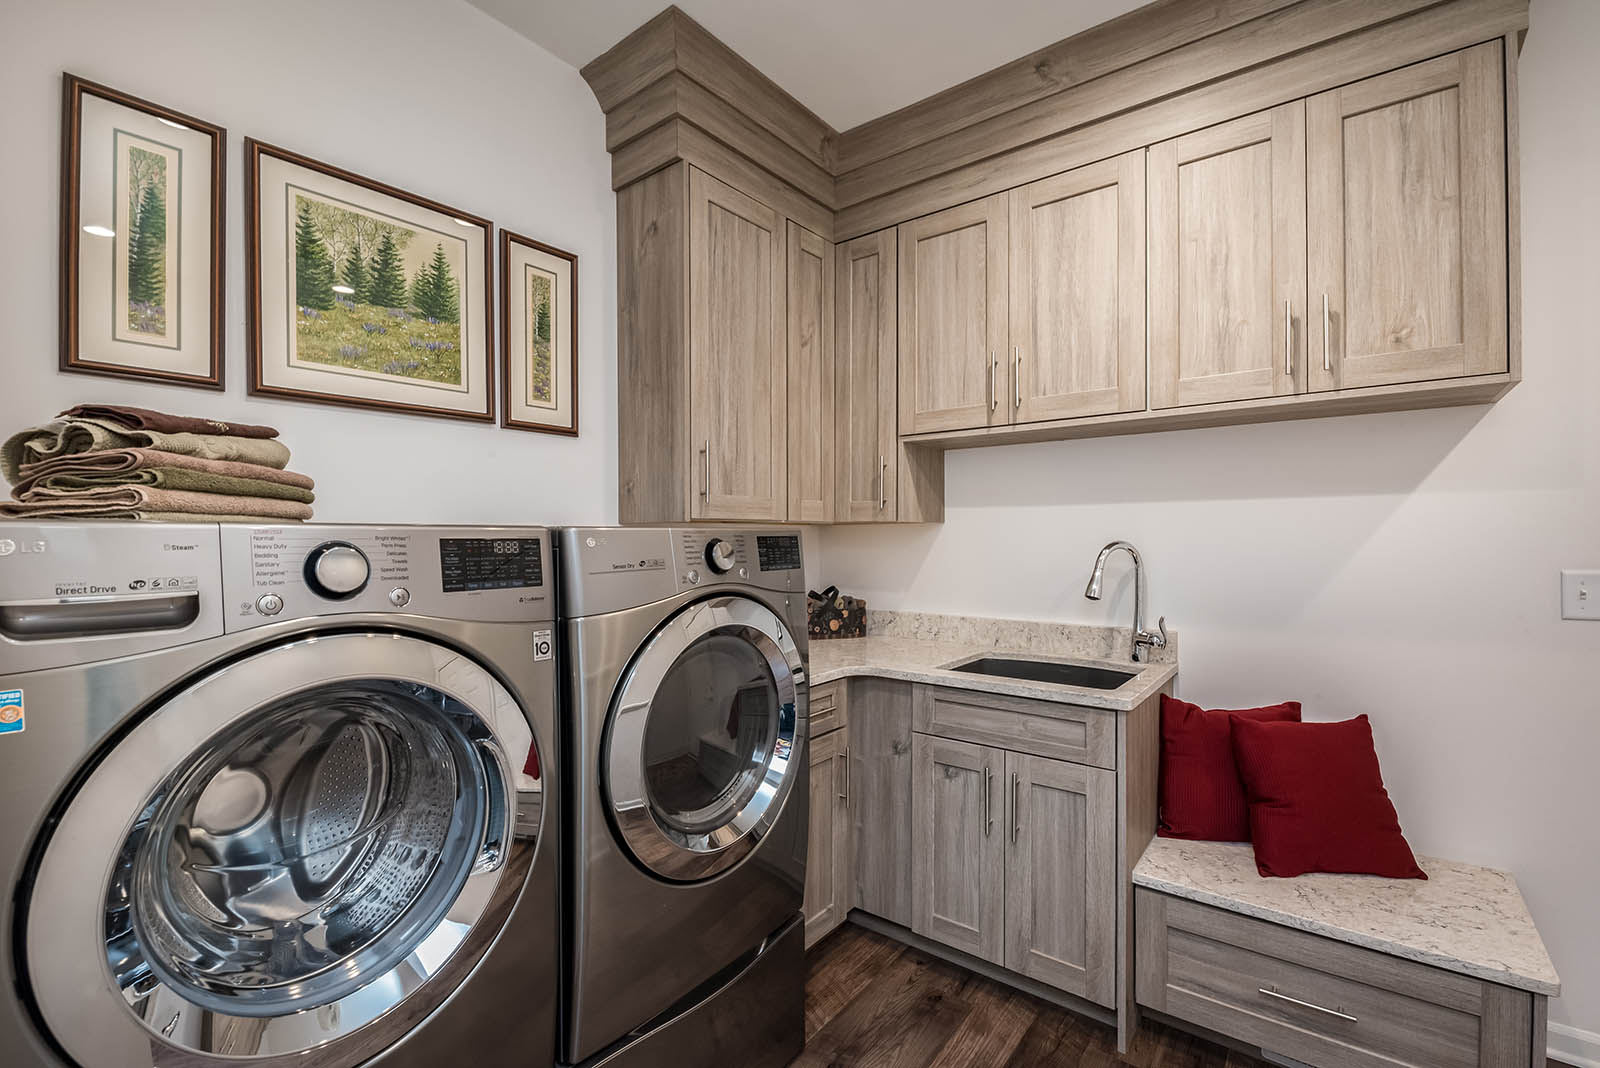 Waterford Ct, New Berlin, Laundry Room